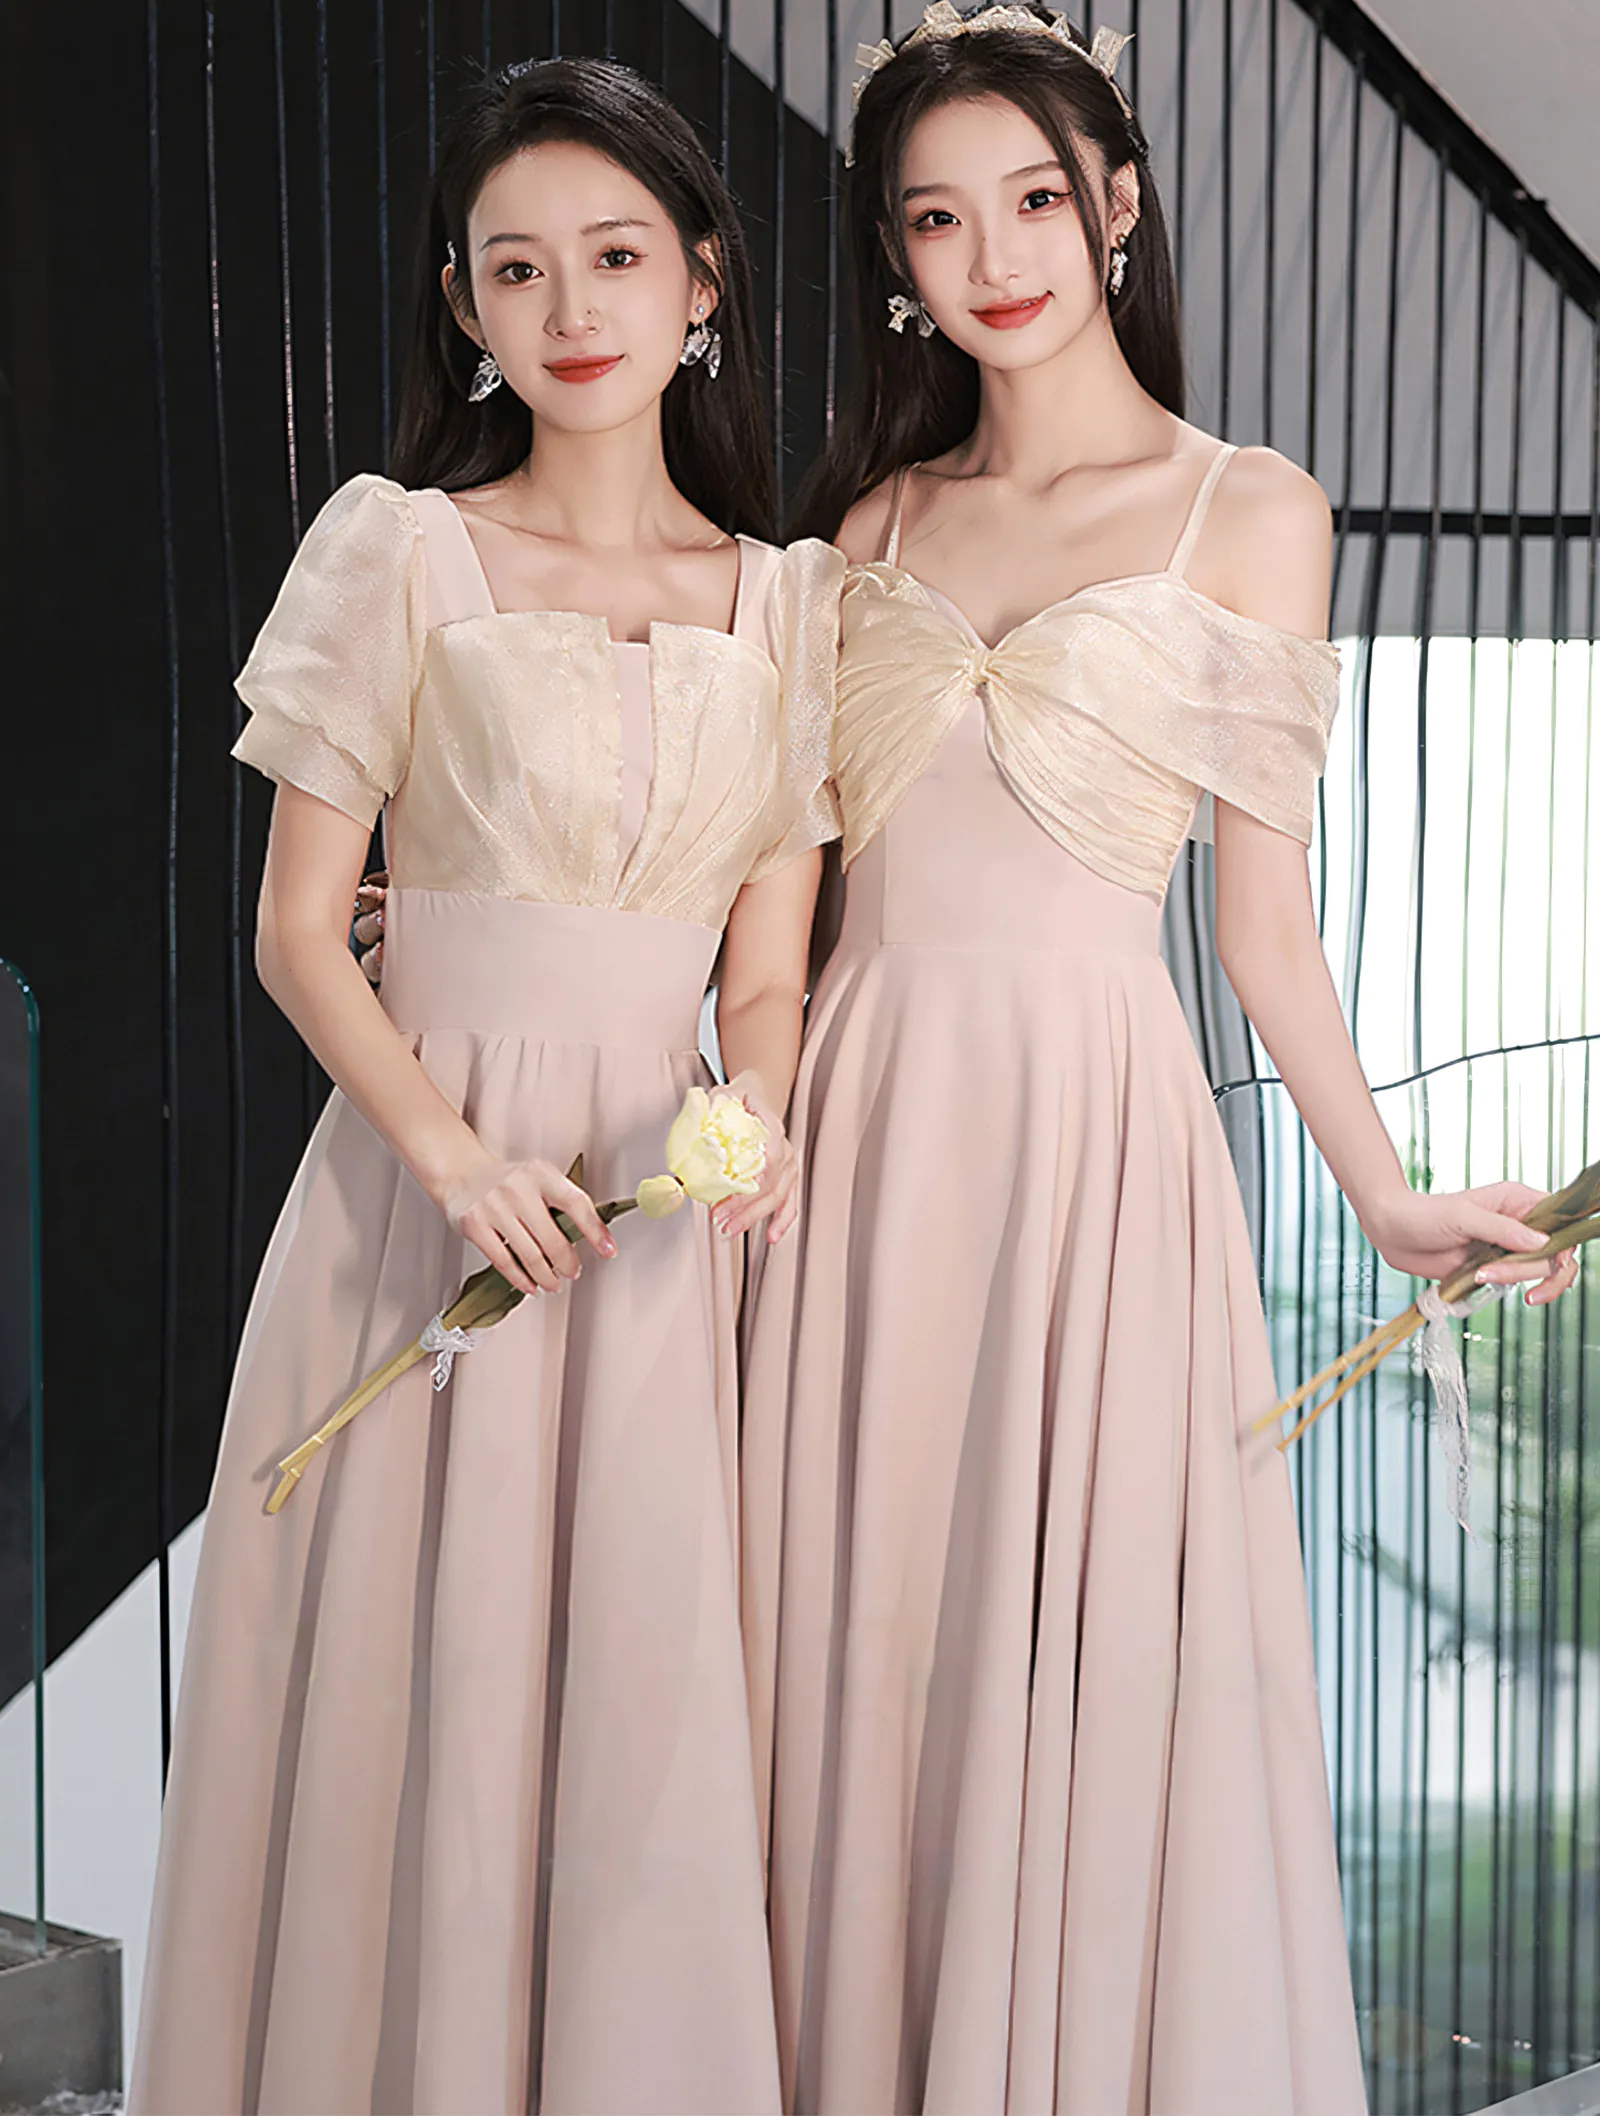 Simple Pink Short Sleeve Bridesmaid Dress Homecoming Graduation Gown02